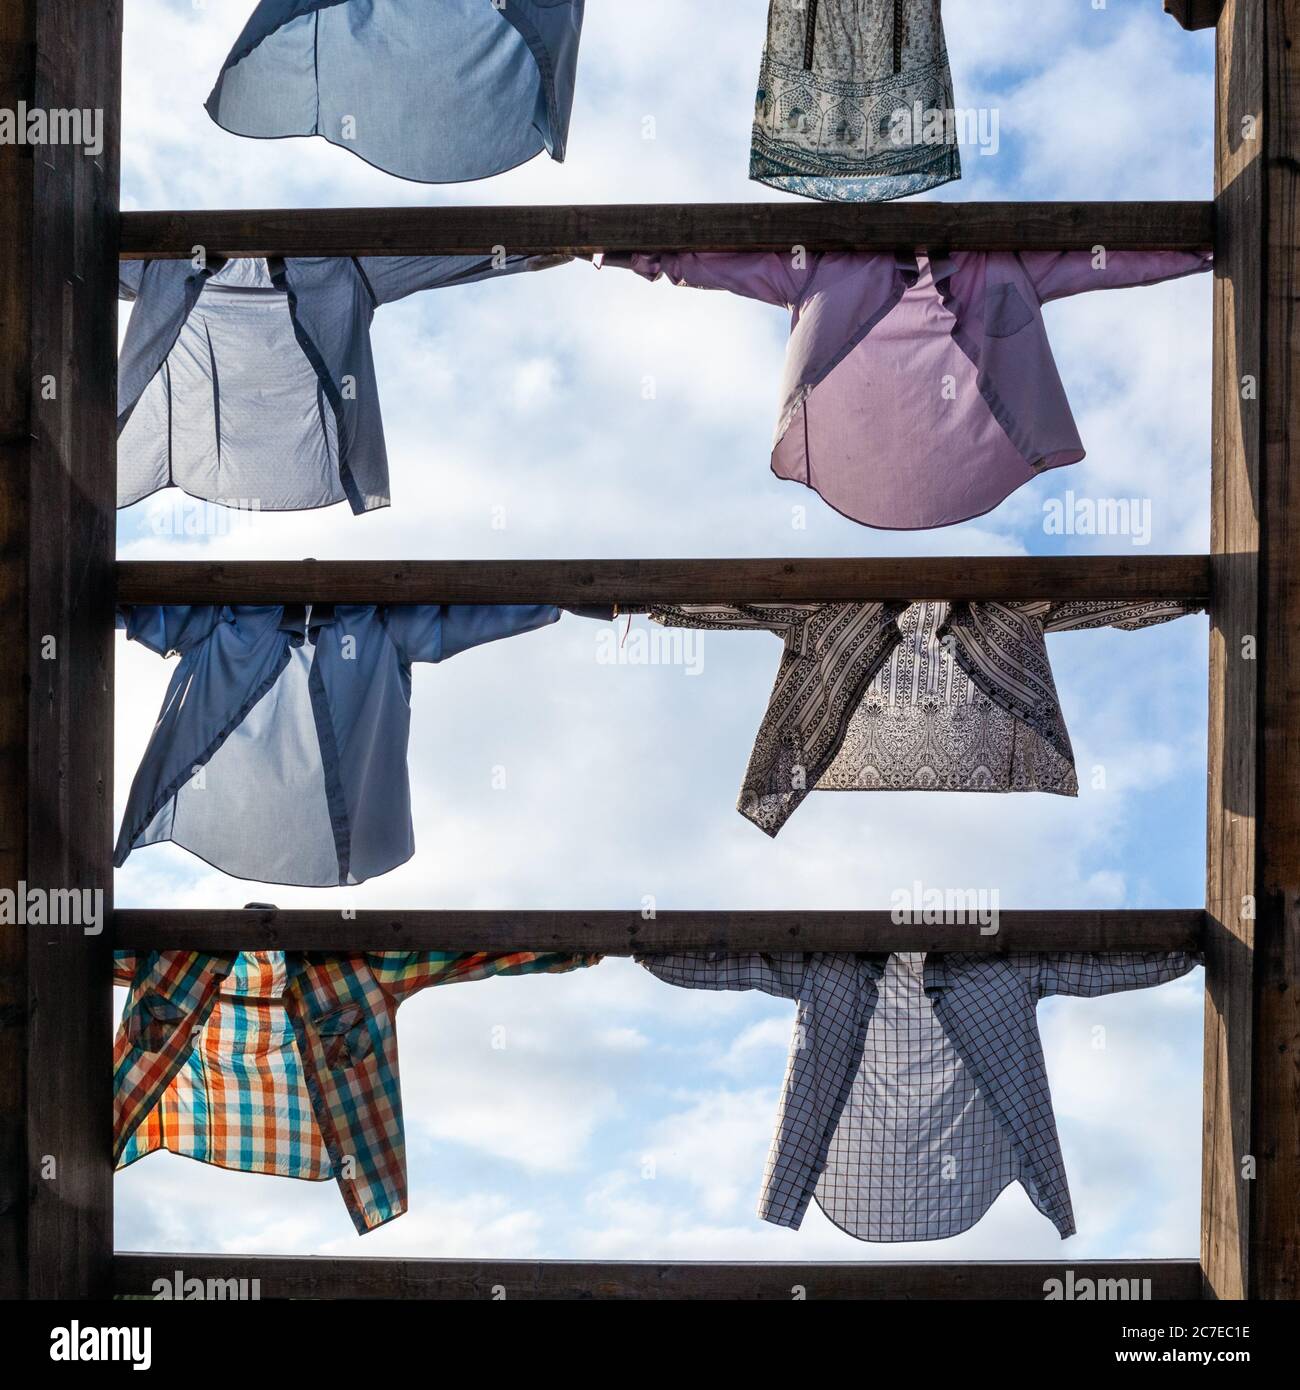 Art installation of colorful shirts clothes hanging on wooden ramp on blue sky background in Oslo, Norway Stock Photo